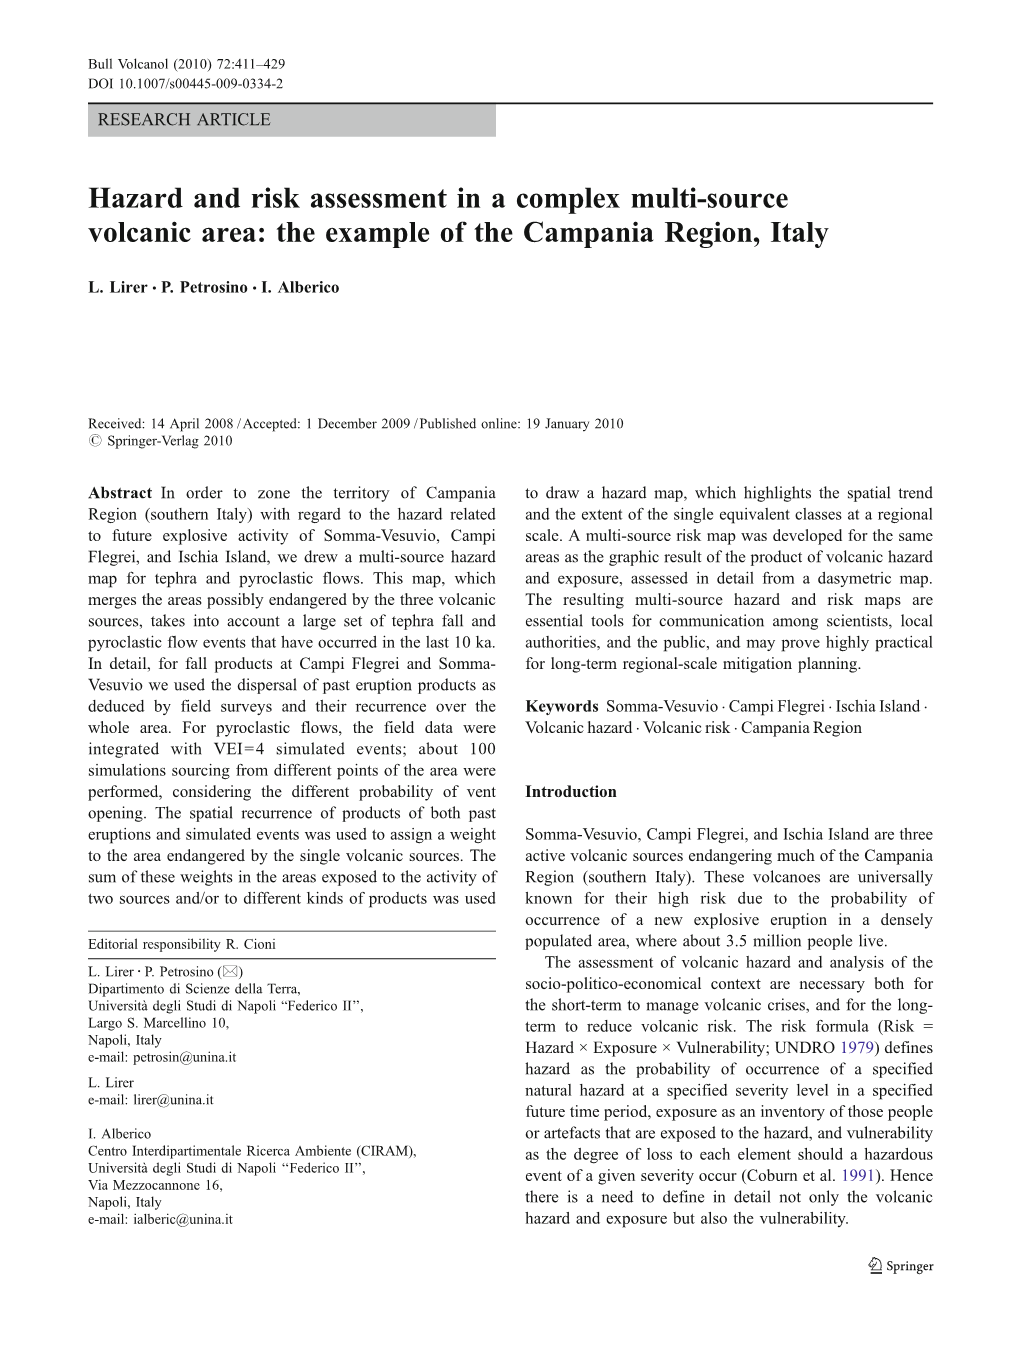 Hazard and Risk Assessment in a Complex Multi-Source Volcanic Area: the Example of the Campania Region, Italy